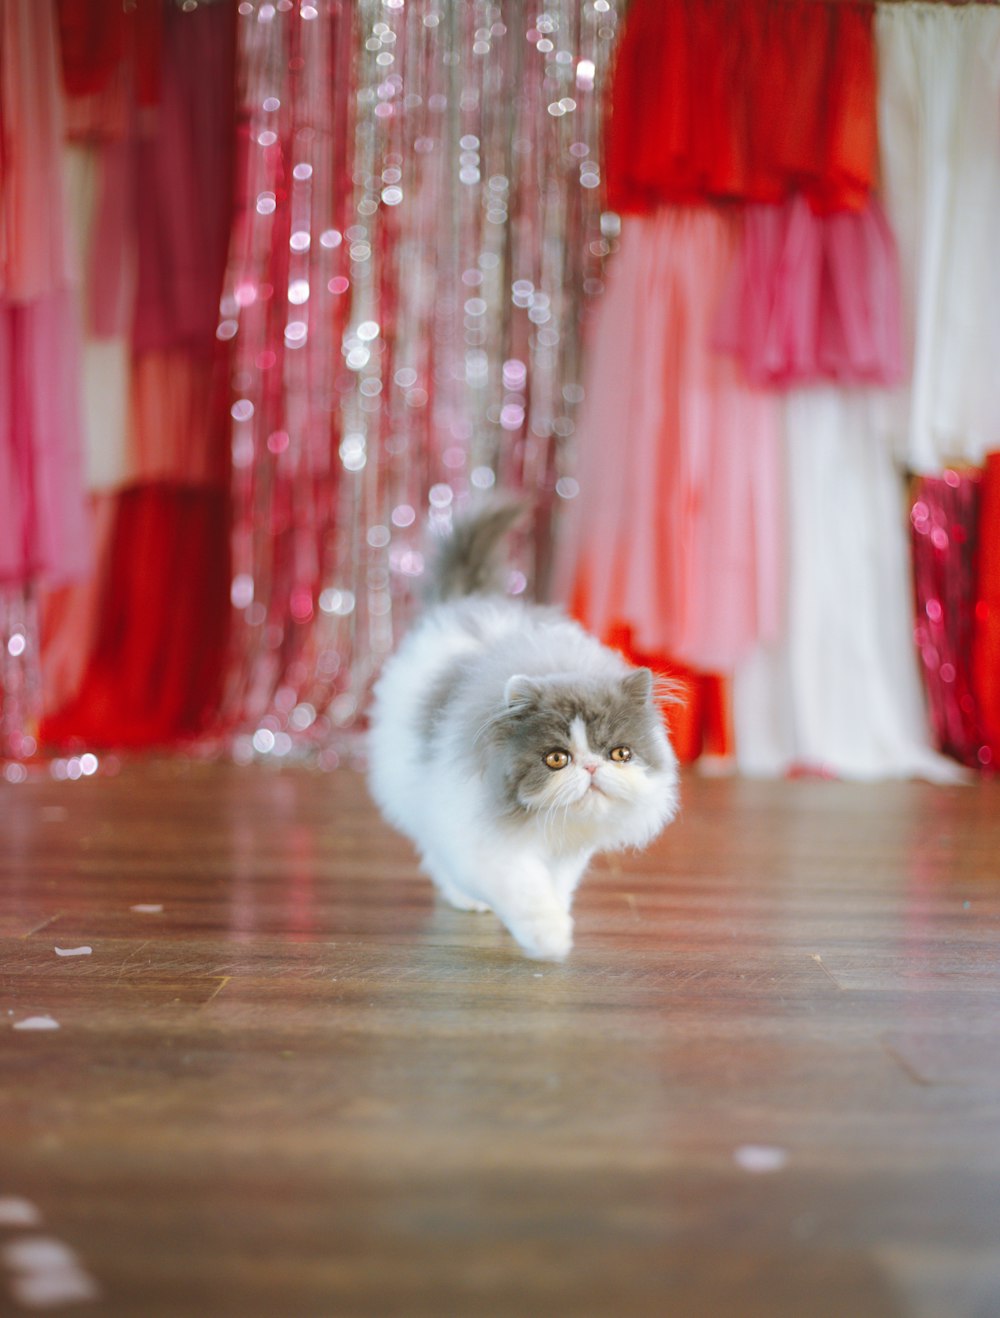 a cat walking across a wooden floor in front of a curtain